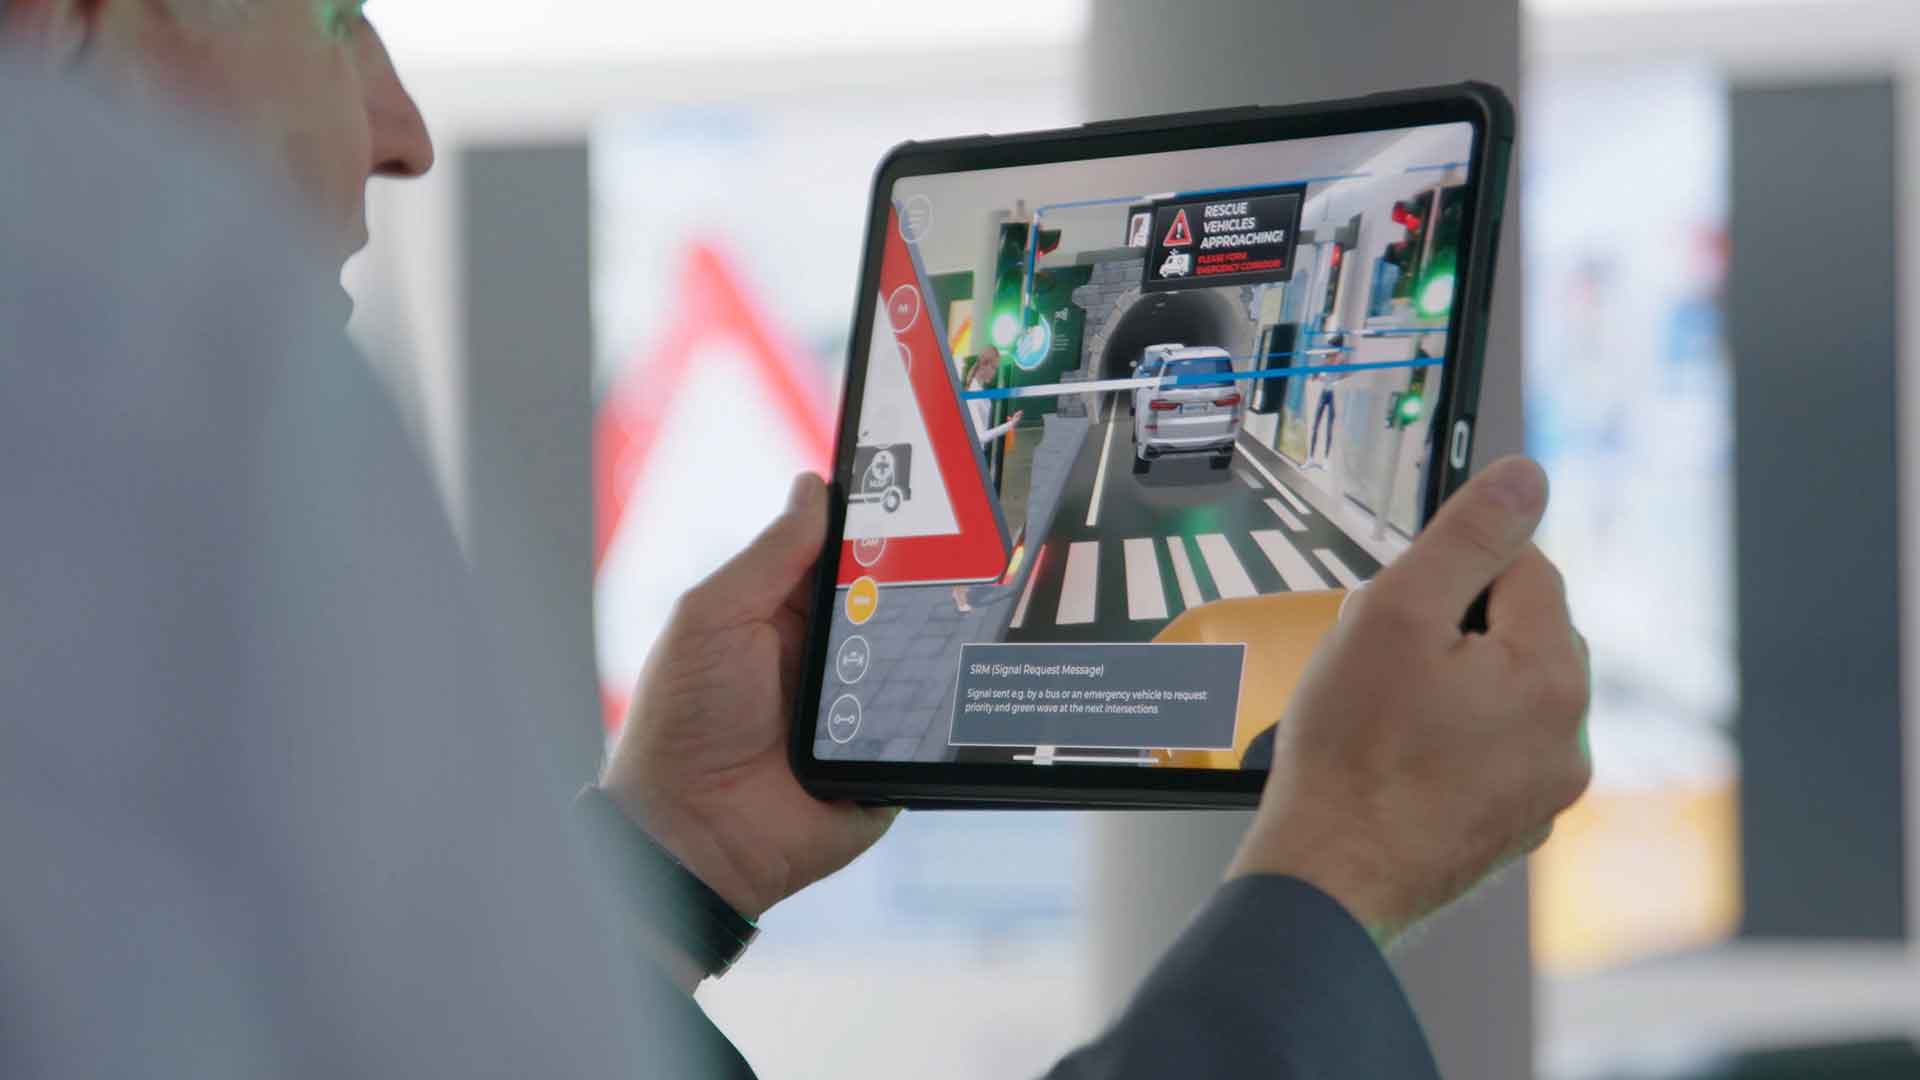 The SWARCO Traffic World AR app allows users to explore modern traffic management with ease.